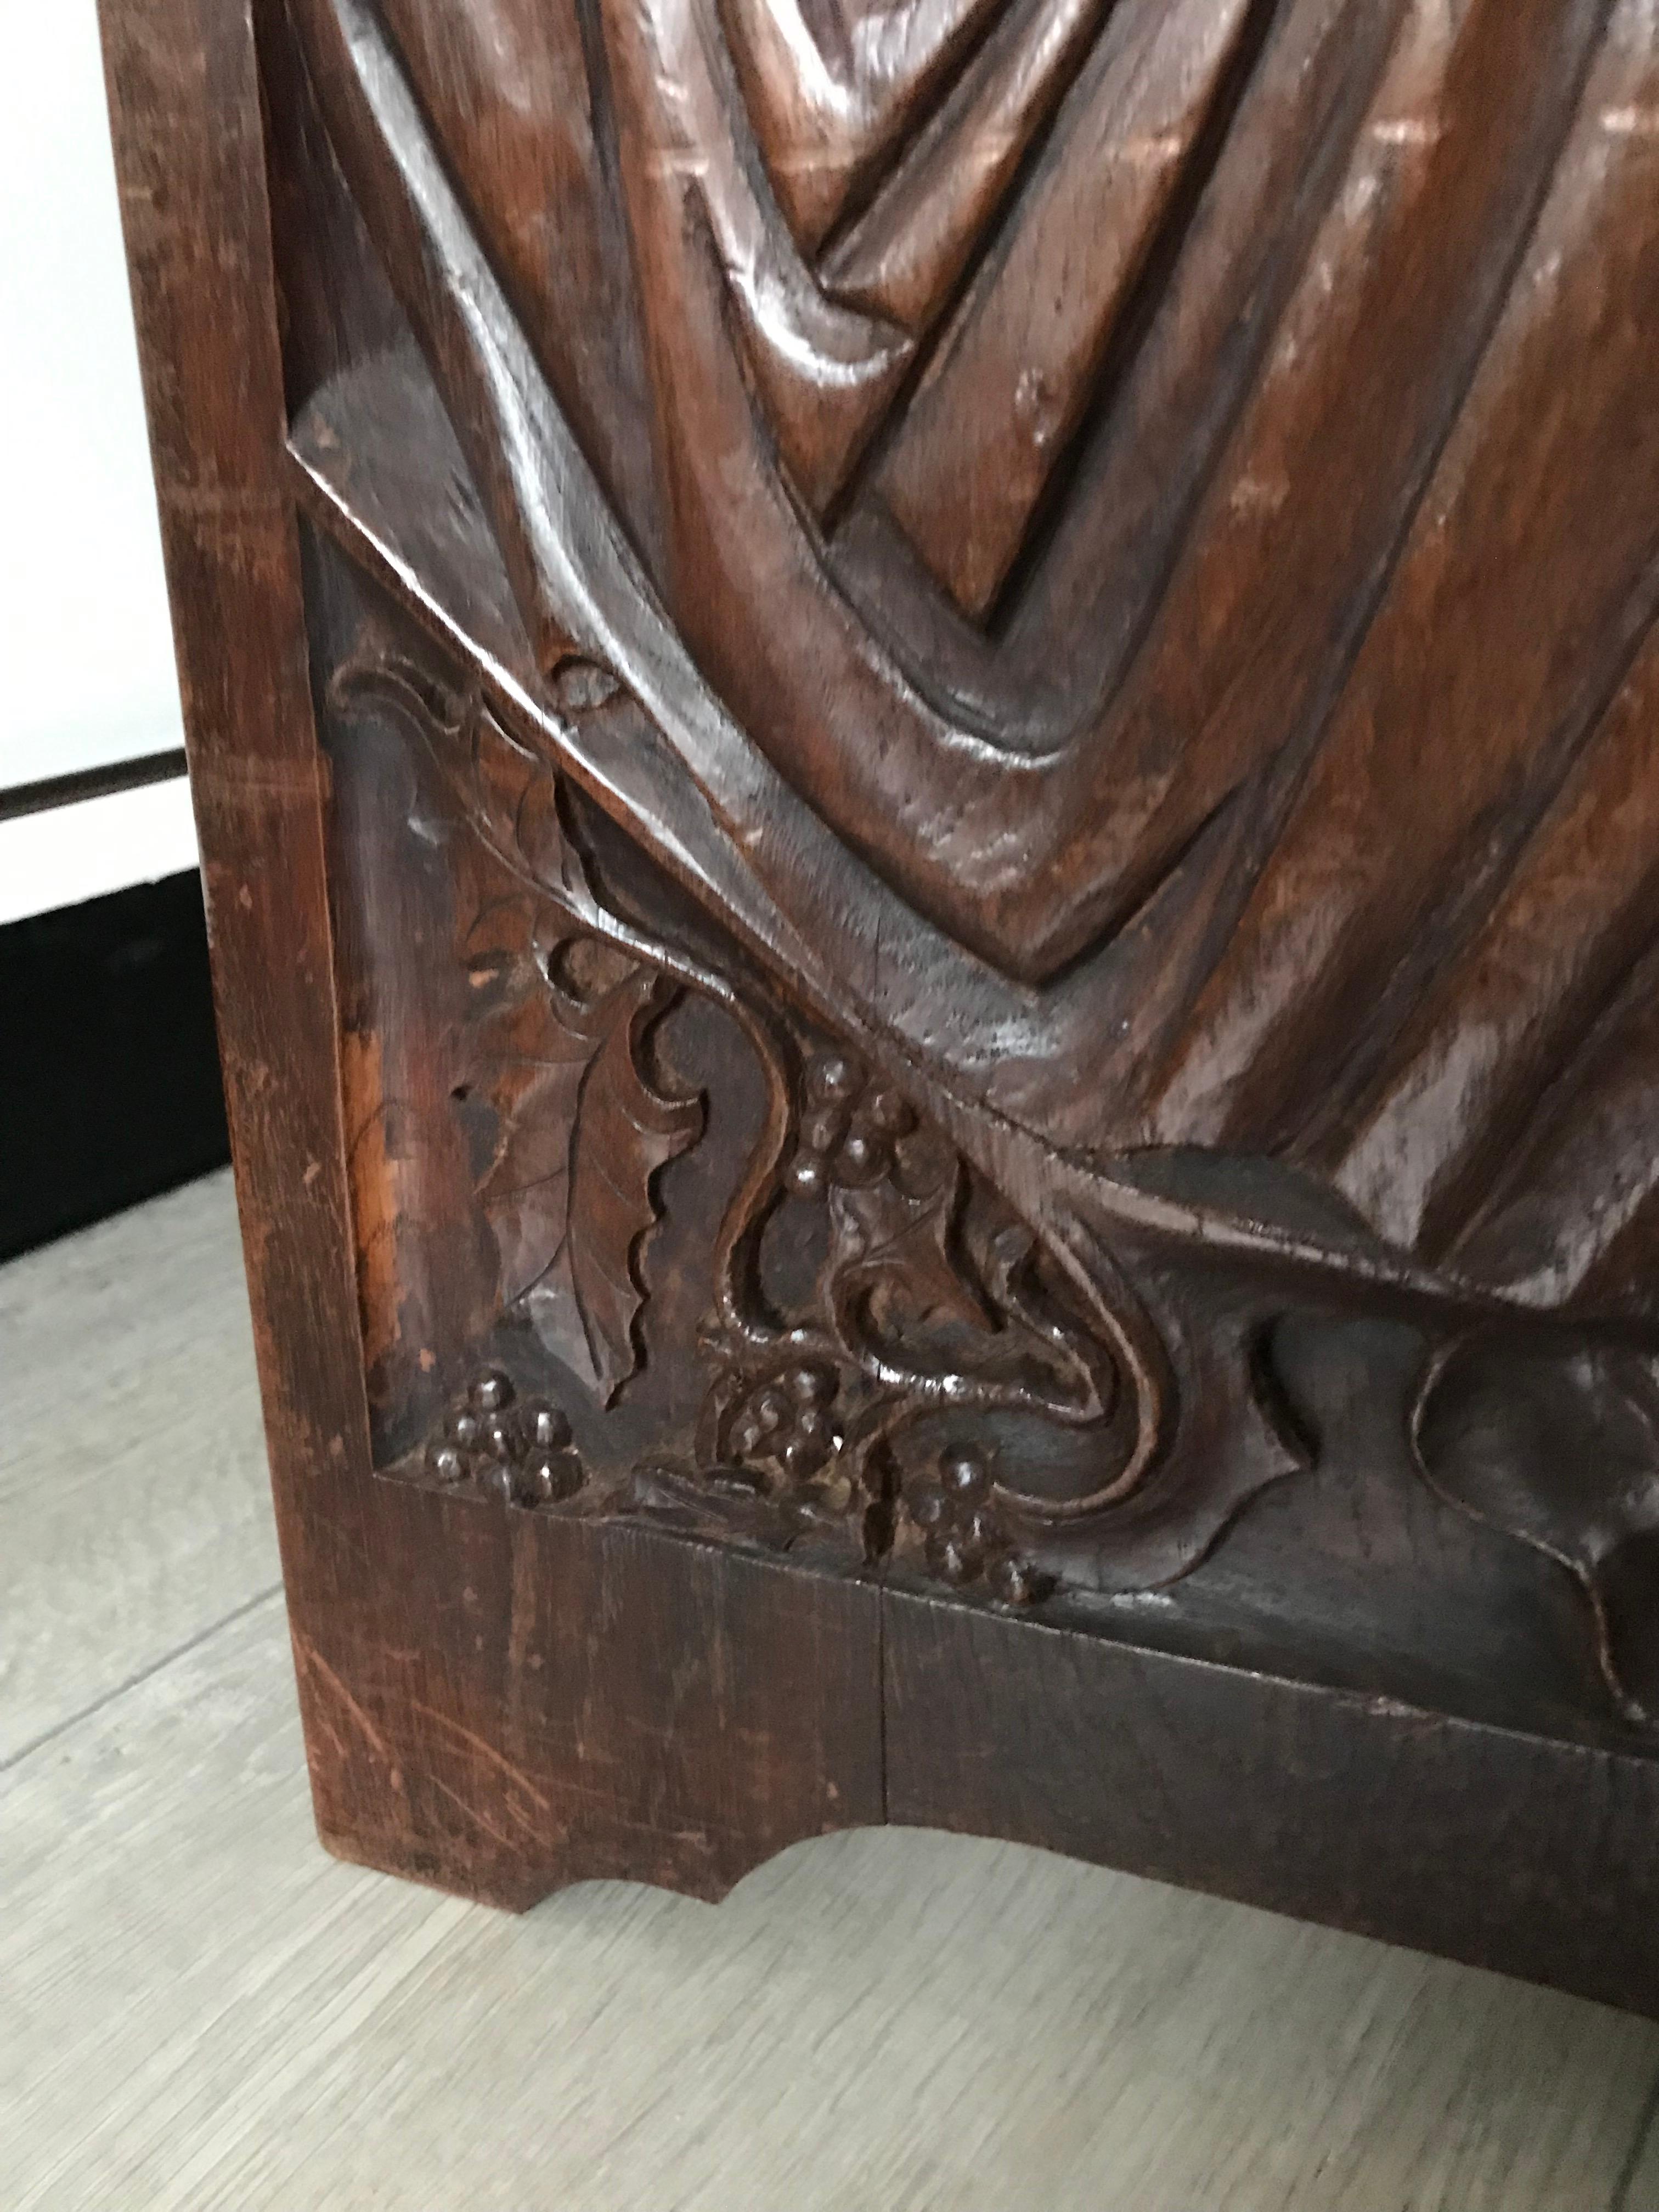 19th Century Gothic Revival Stool, Bench with Hand Carved Sheep and Wolve Biblical Sculptures